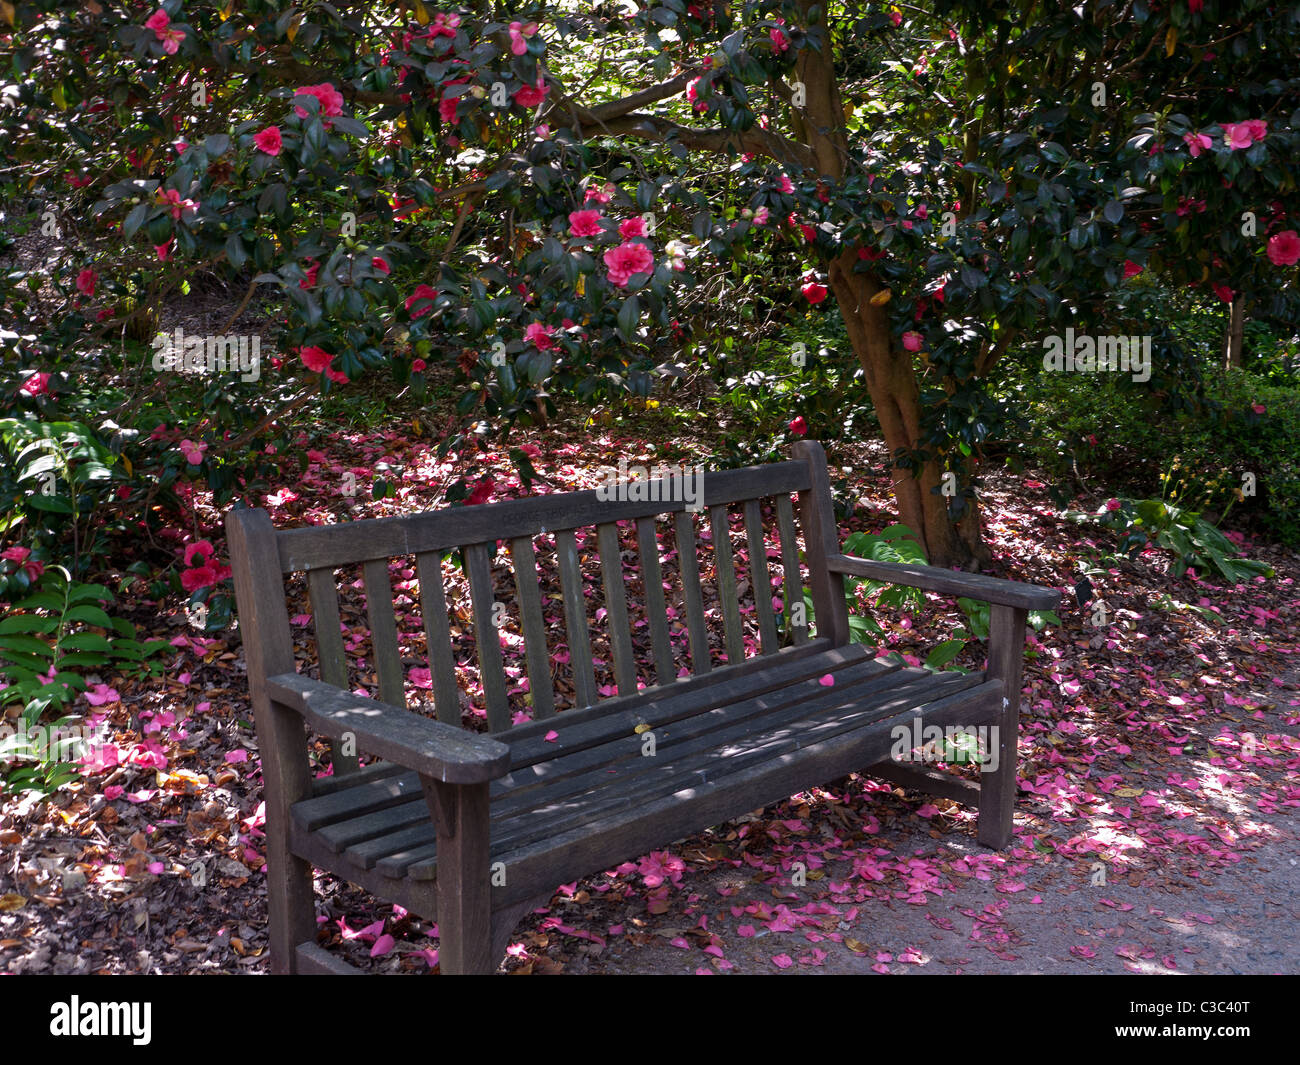 A bench in the Royal Horticultural Society gardens at Wisley, UK Stock Photo